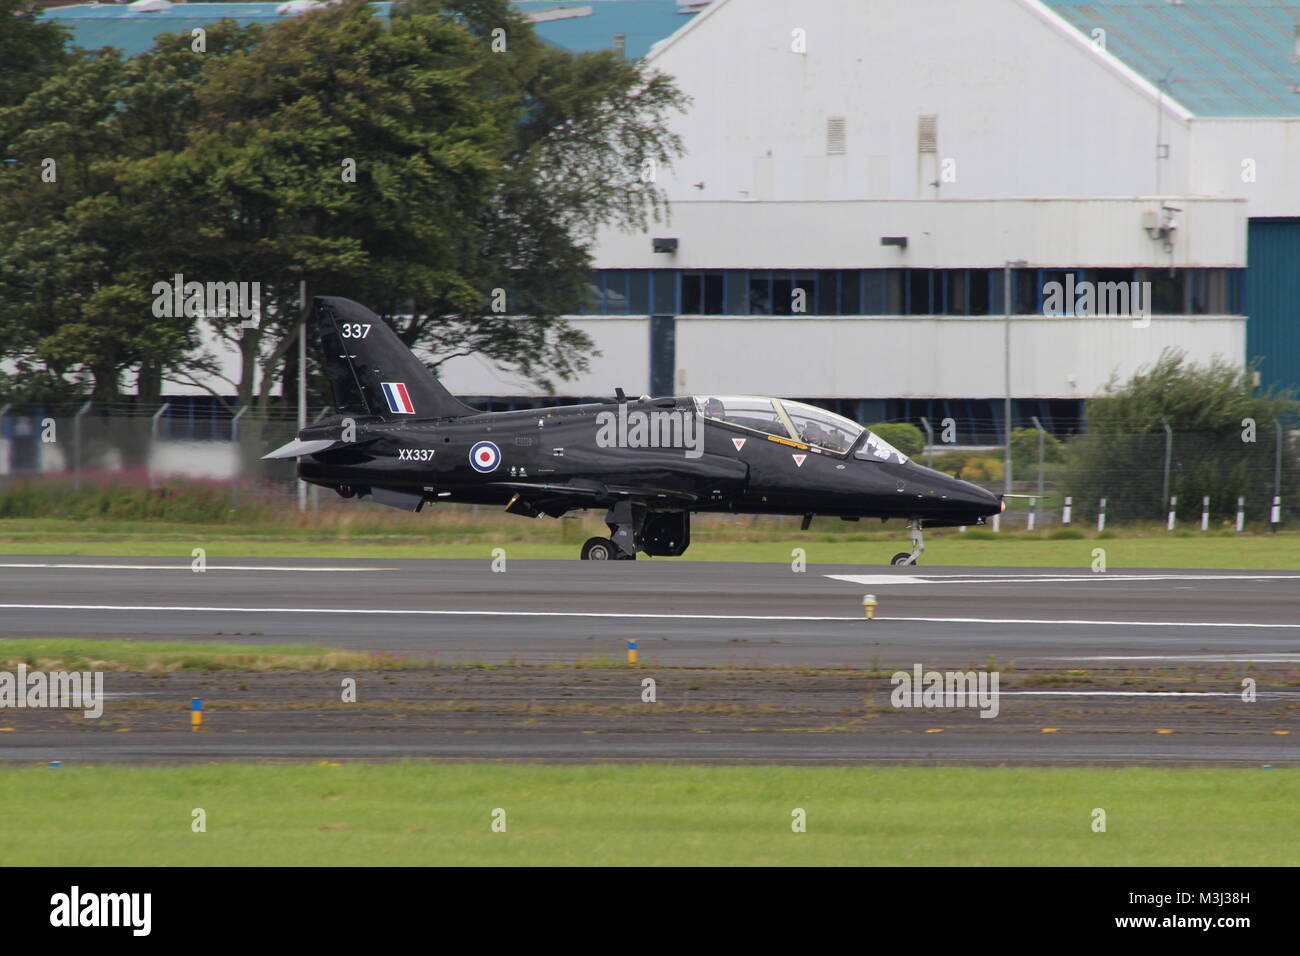 XX337 a BAe Hawk T1A operated by the Royal Navy, at Prestwick Airport during Exercise Saxon Warrior 2017. Stock Photo